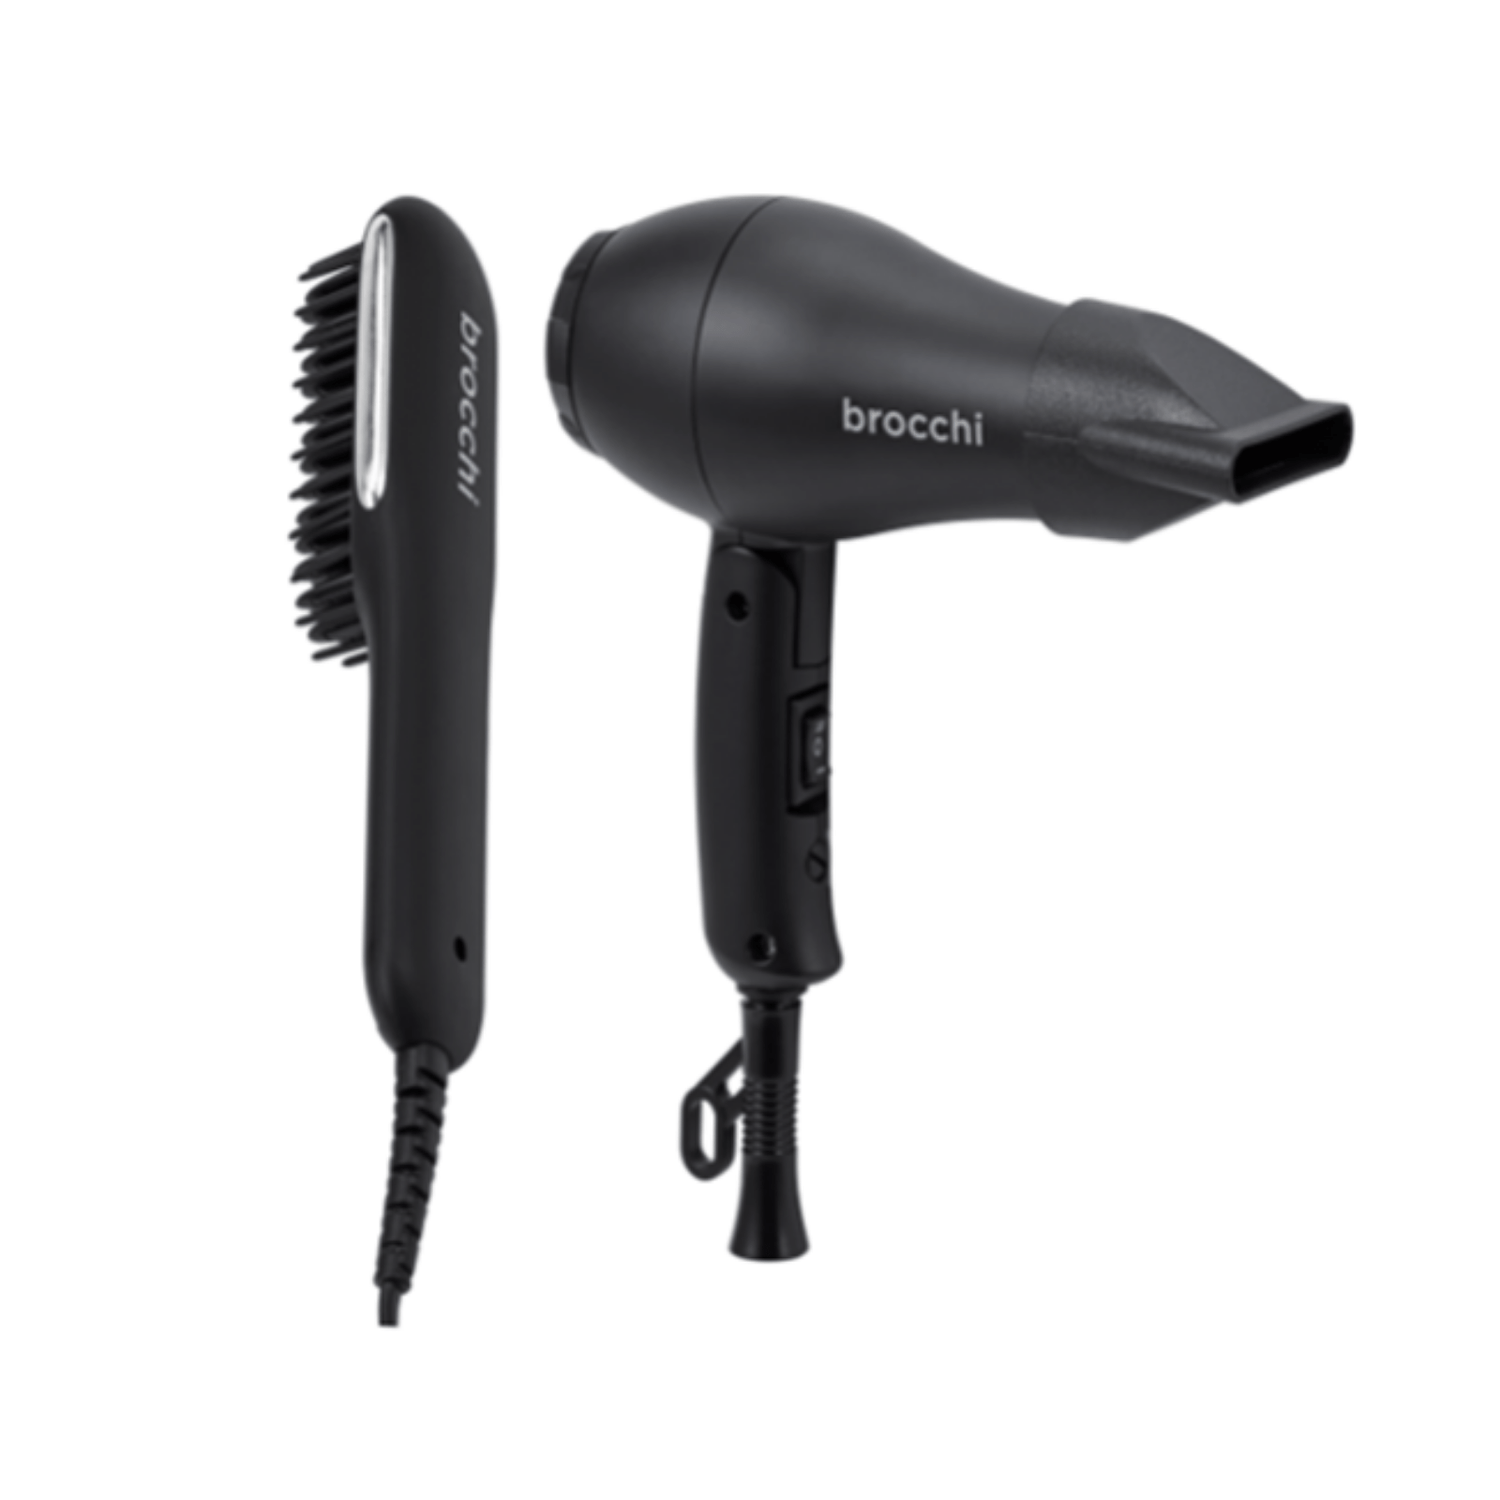 Brocchi Brocchi Mini Hair Dryer and Hot Air Brush Travel Set | Limited Edition Bundle